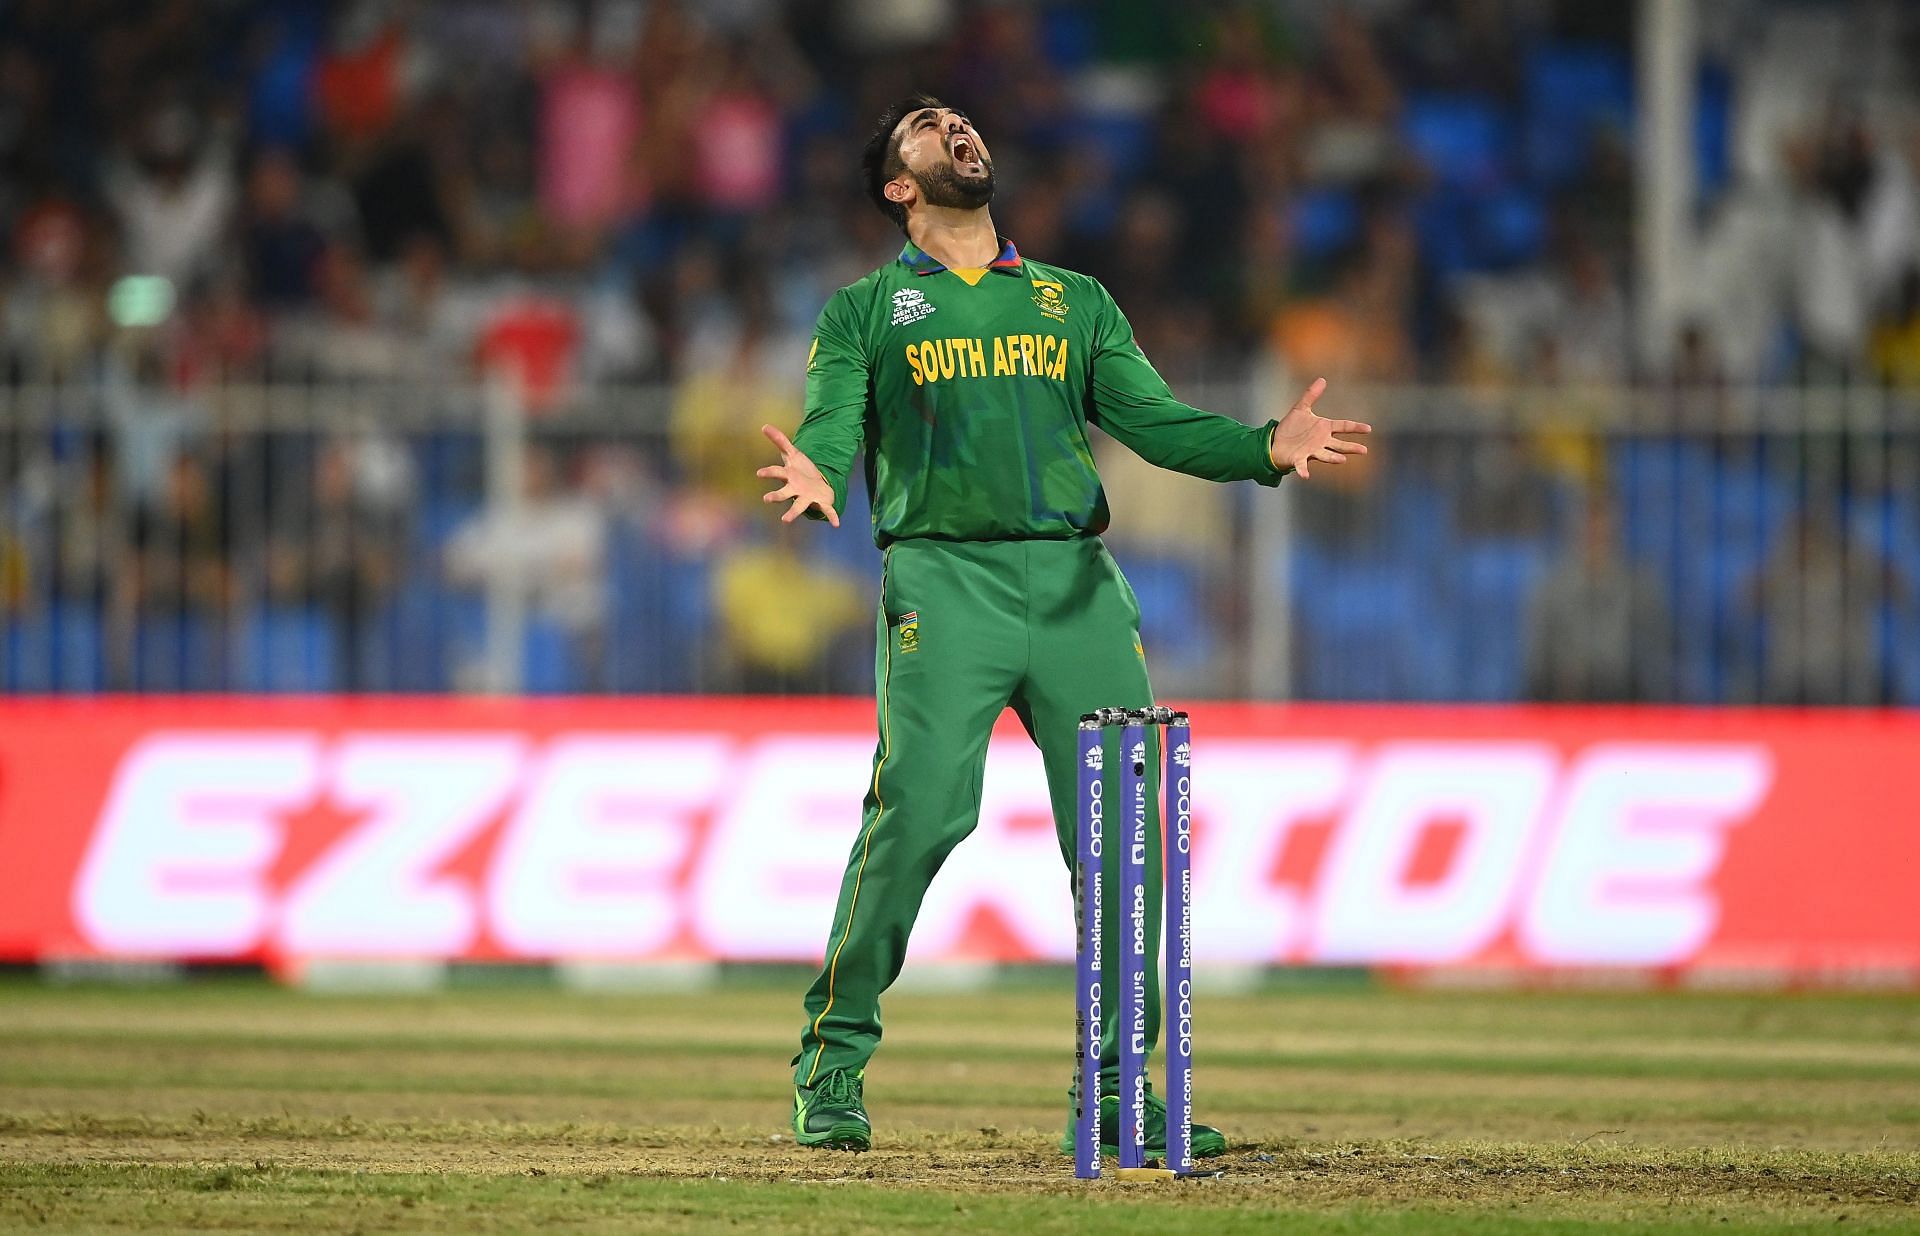 Tabraiz Shamsi has performed exceptionally well for South Africa.